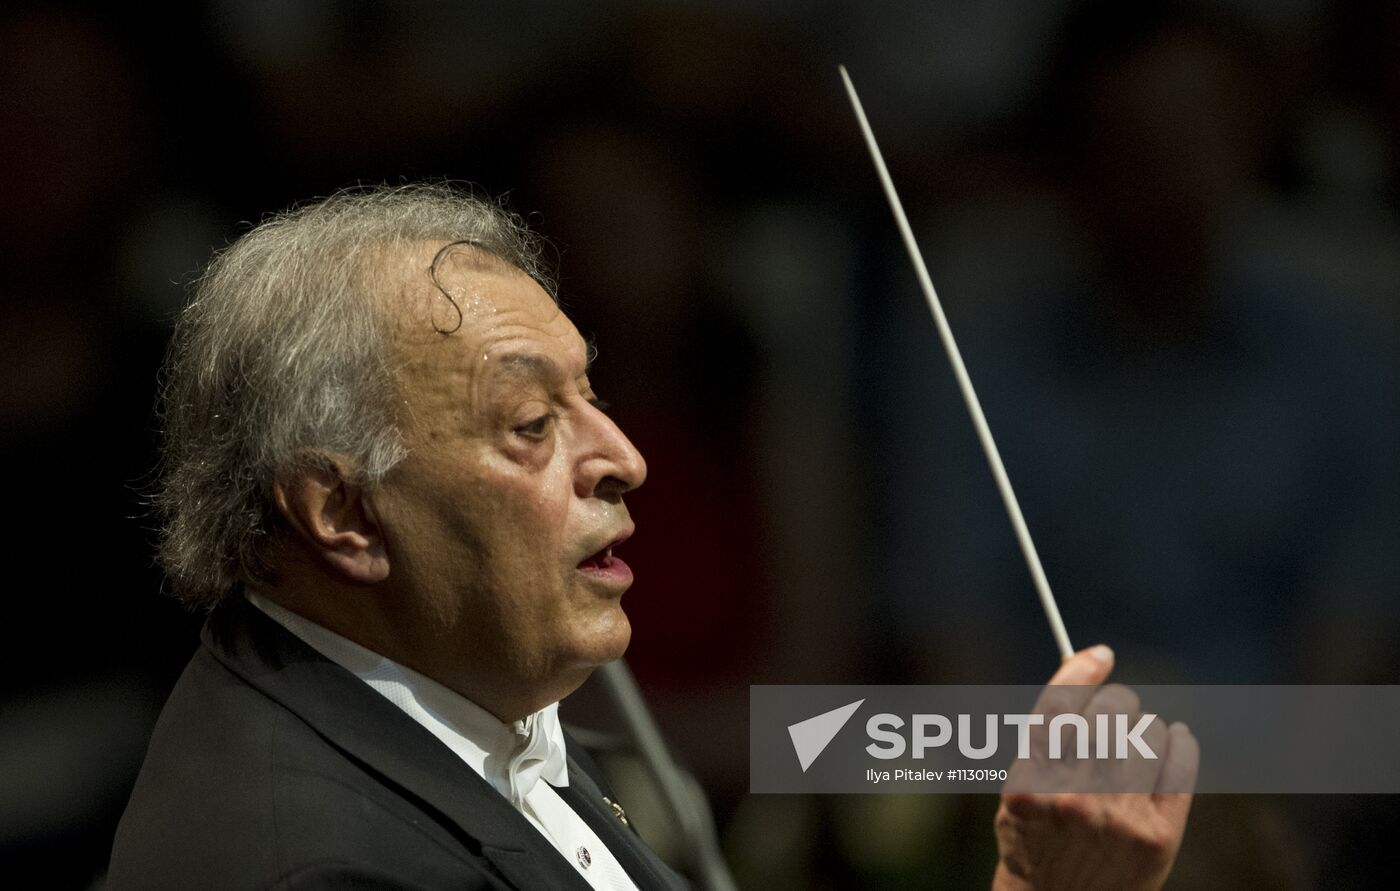 Concert by Israel Philharmonic Orchestra